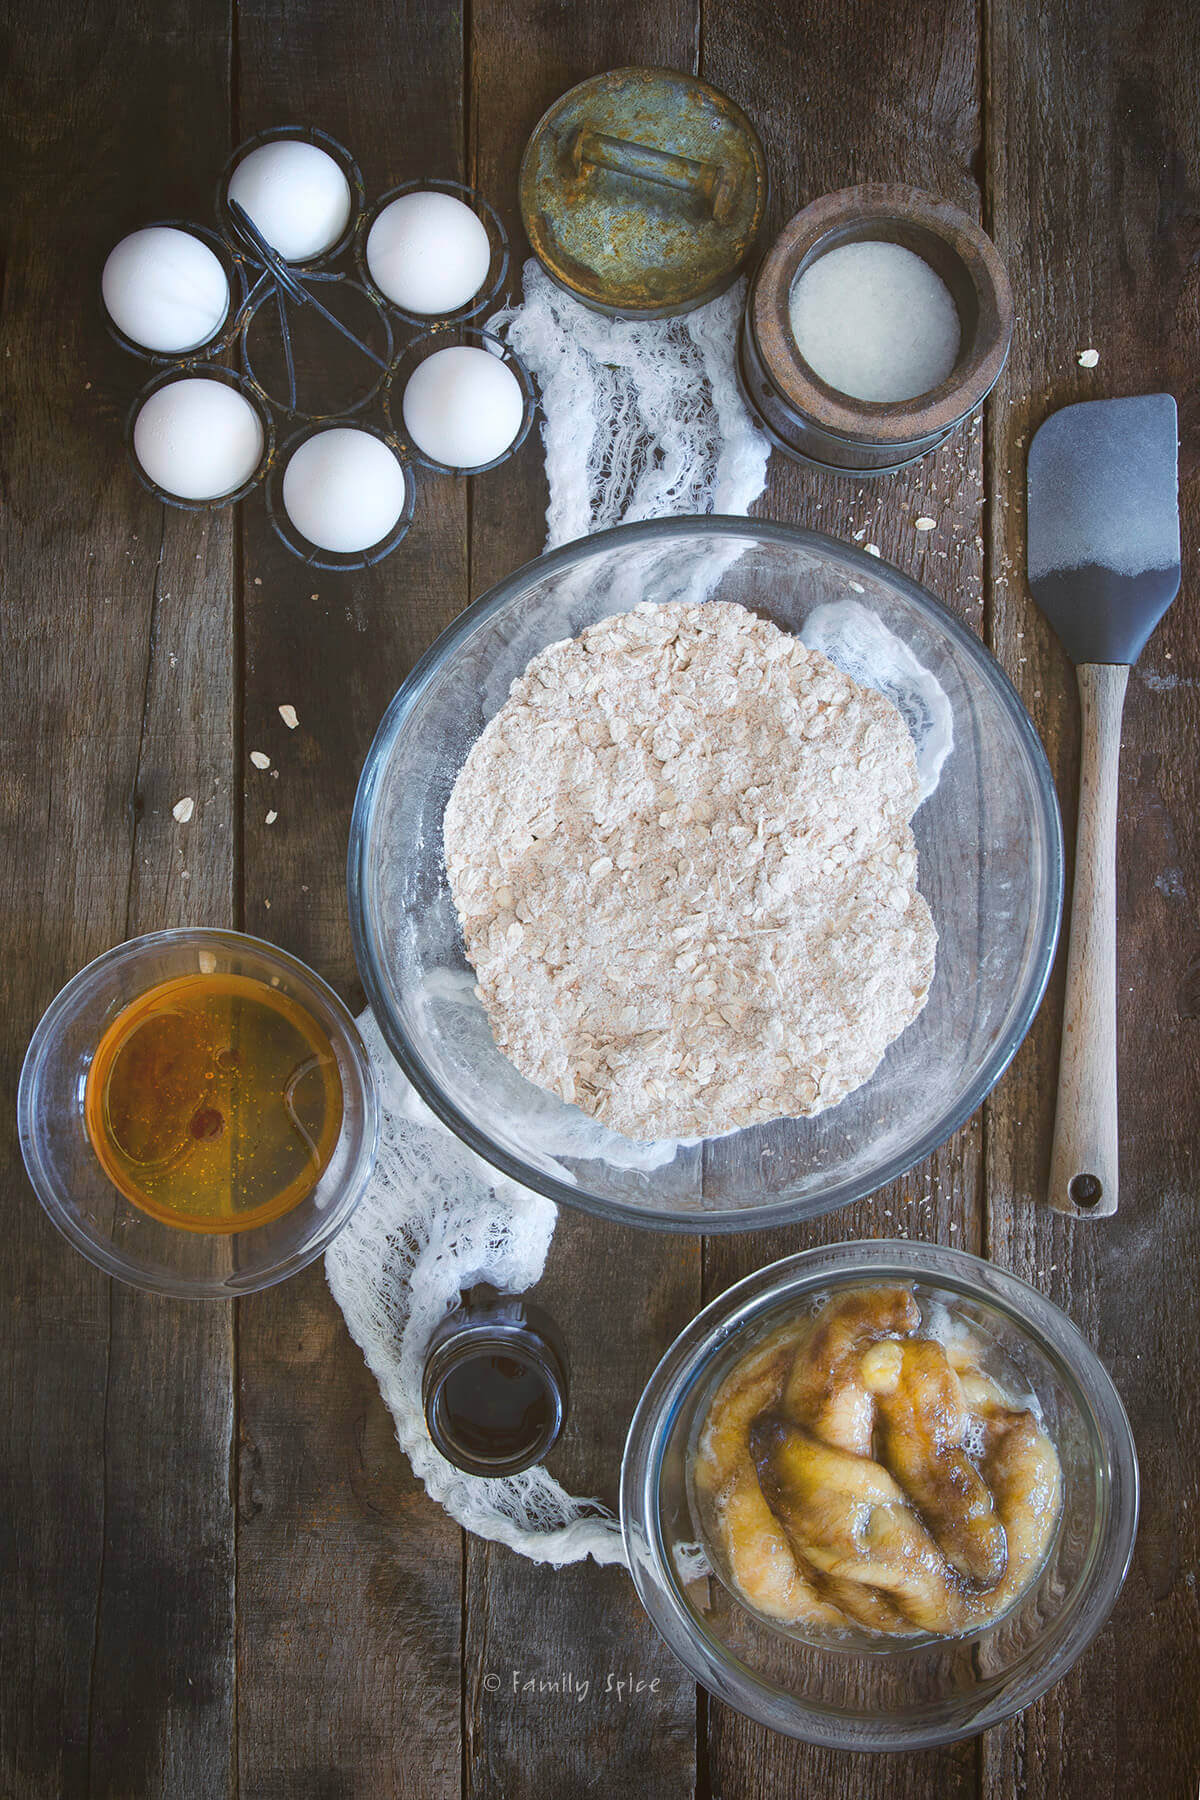 Flours in one bowl, a bowl with honey, another bowl with mashed bananas and eggs to make oatmeal muffins